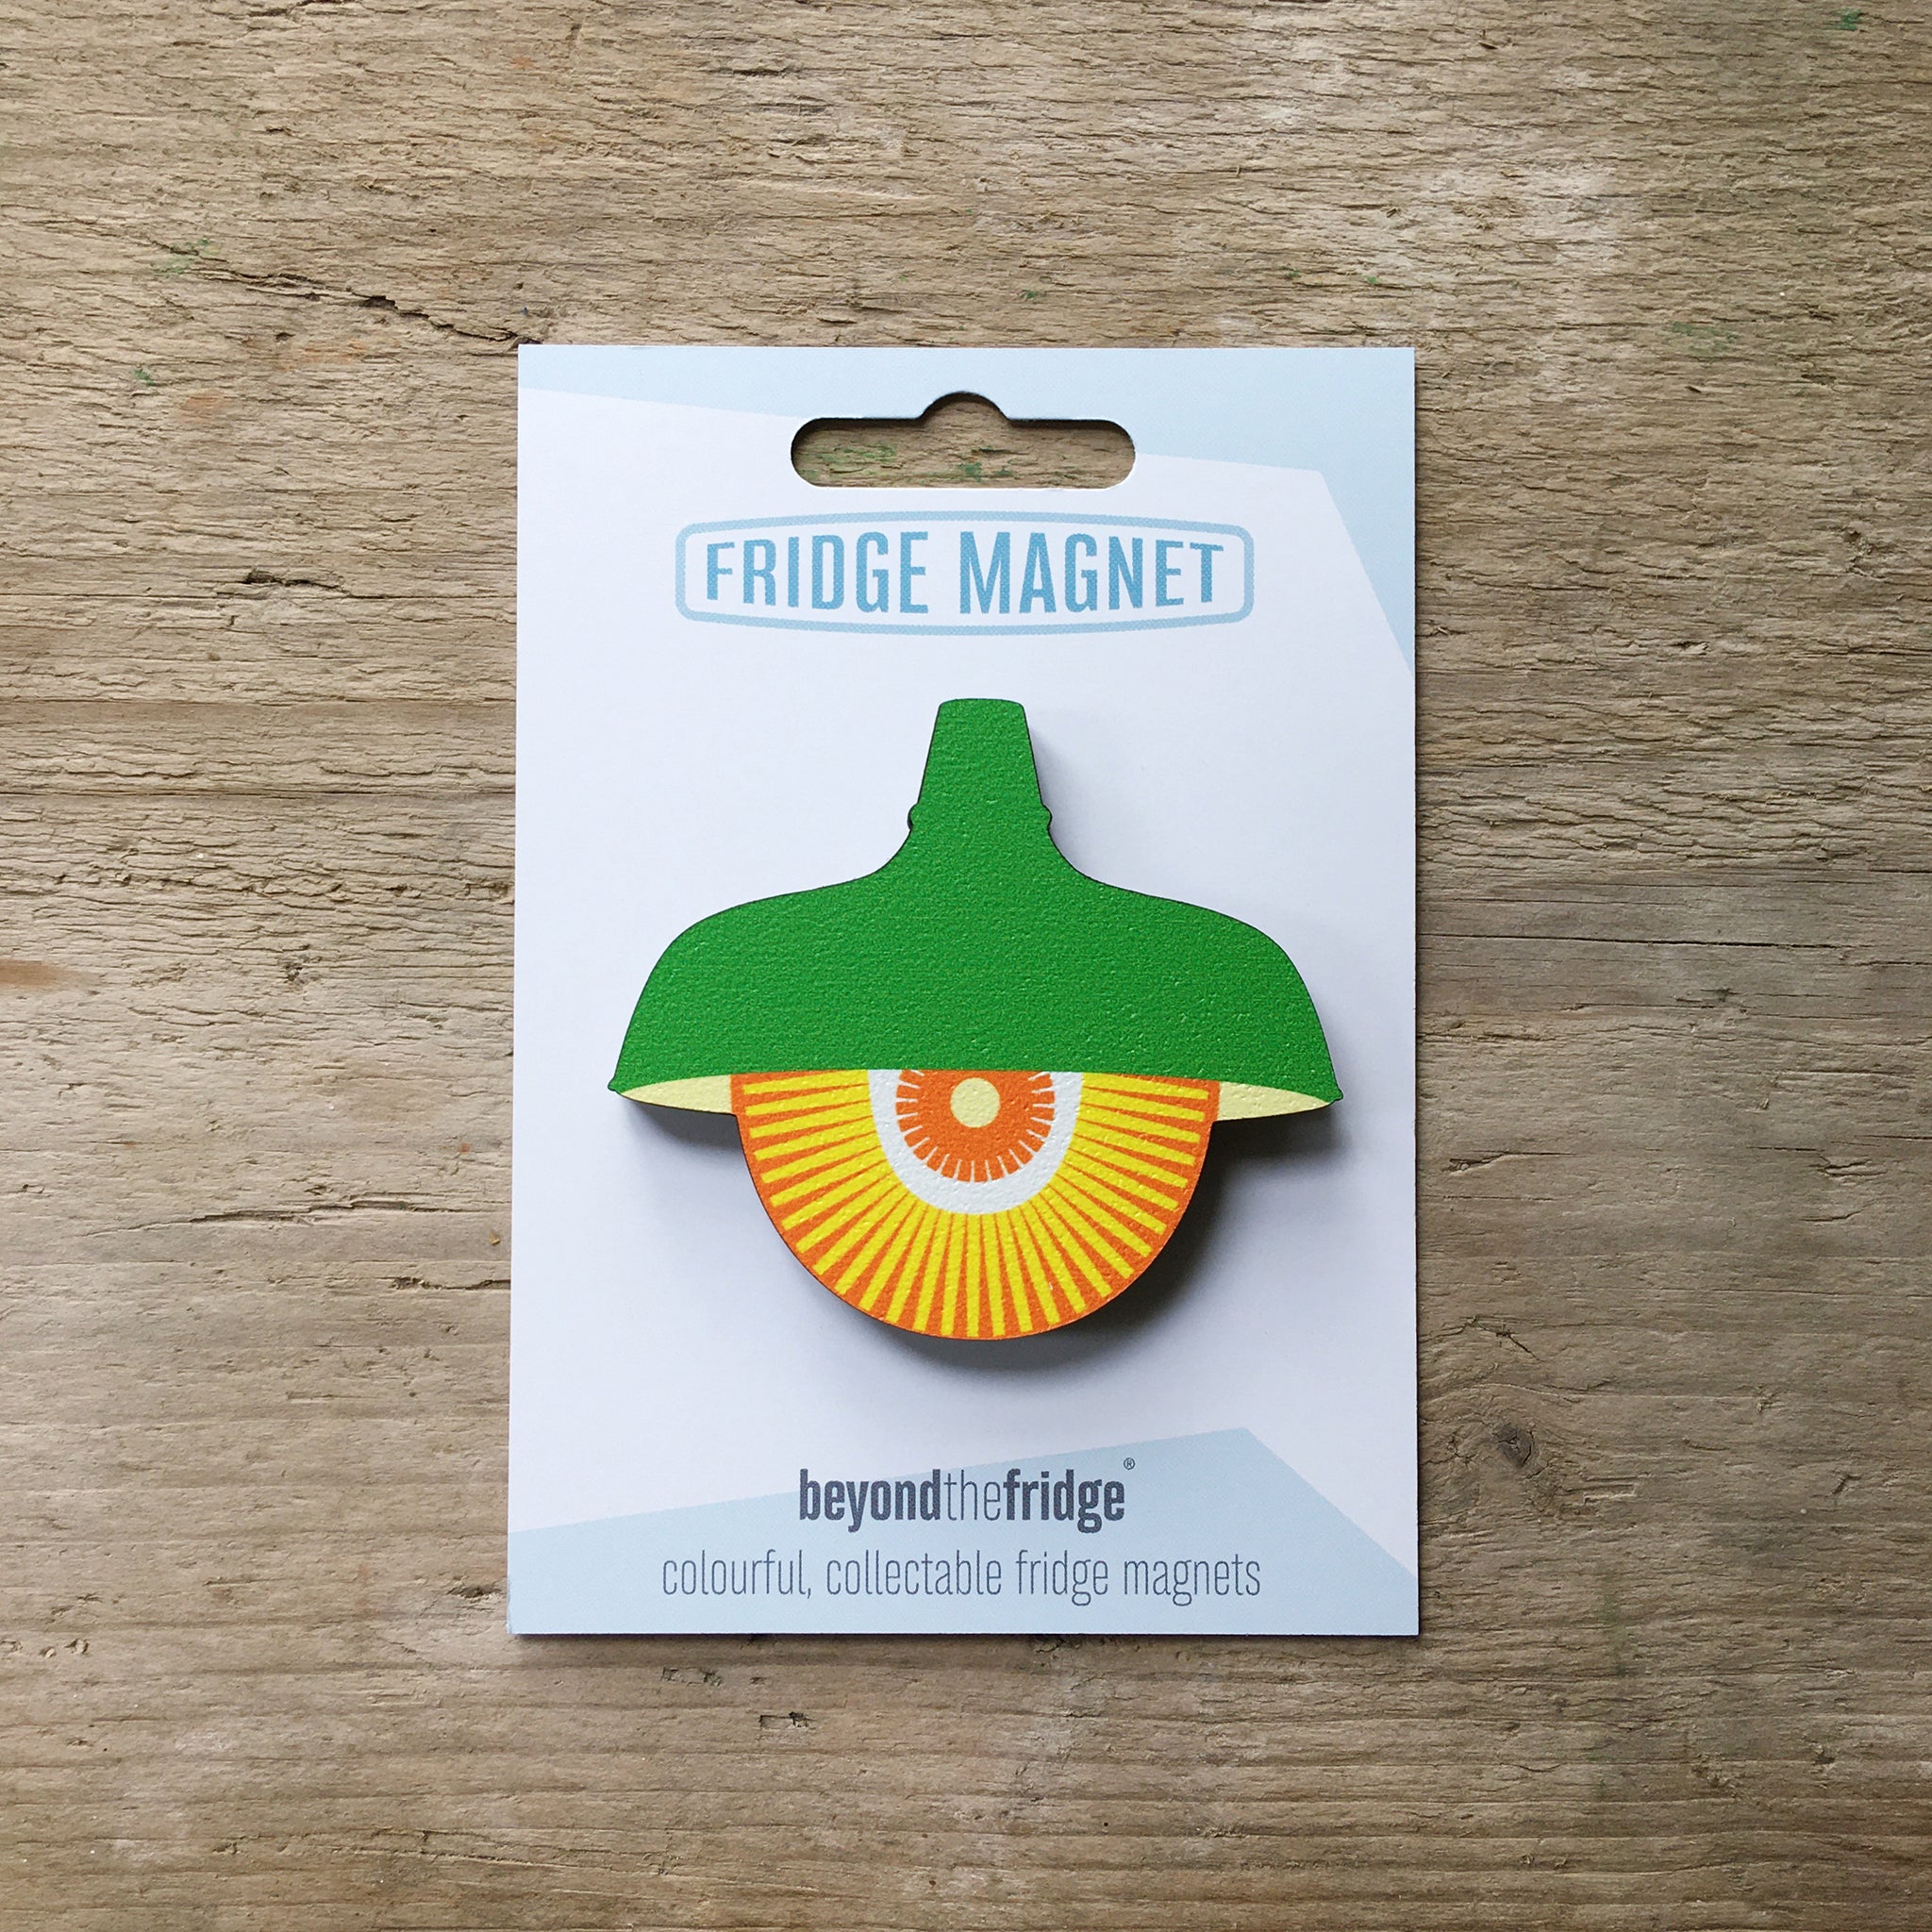 A green retro pendant light design plywood fridge magnet by Beyond the Fridge in it’s pack on a wooden background